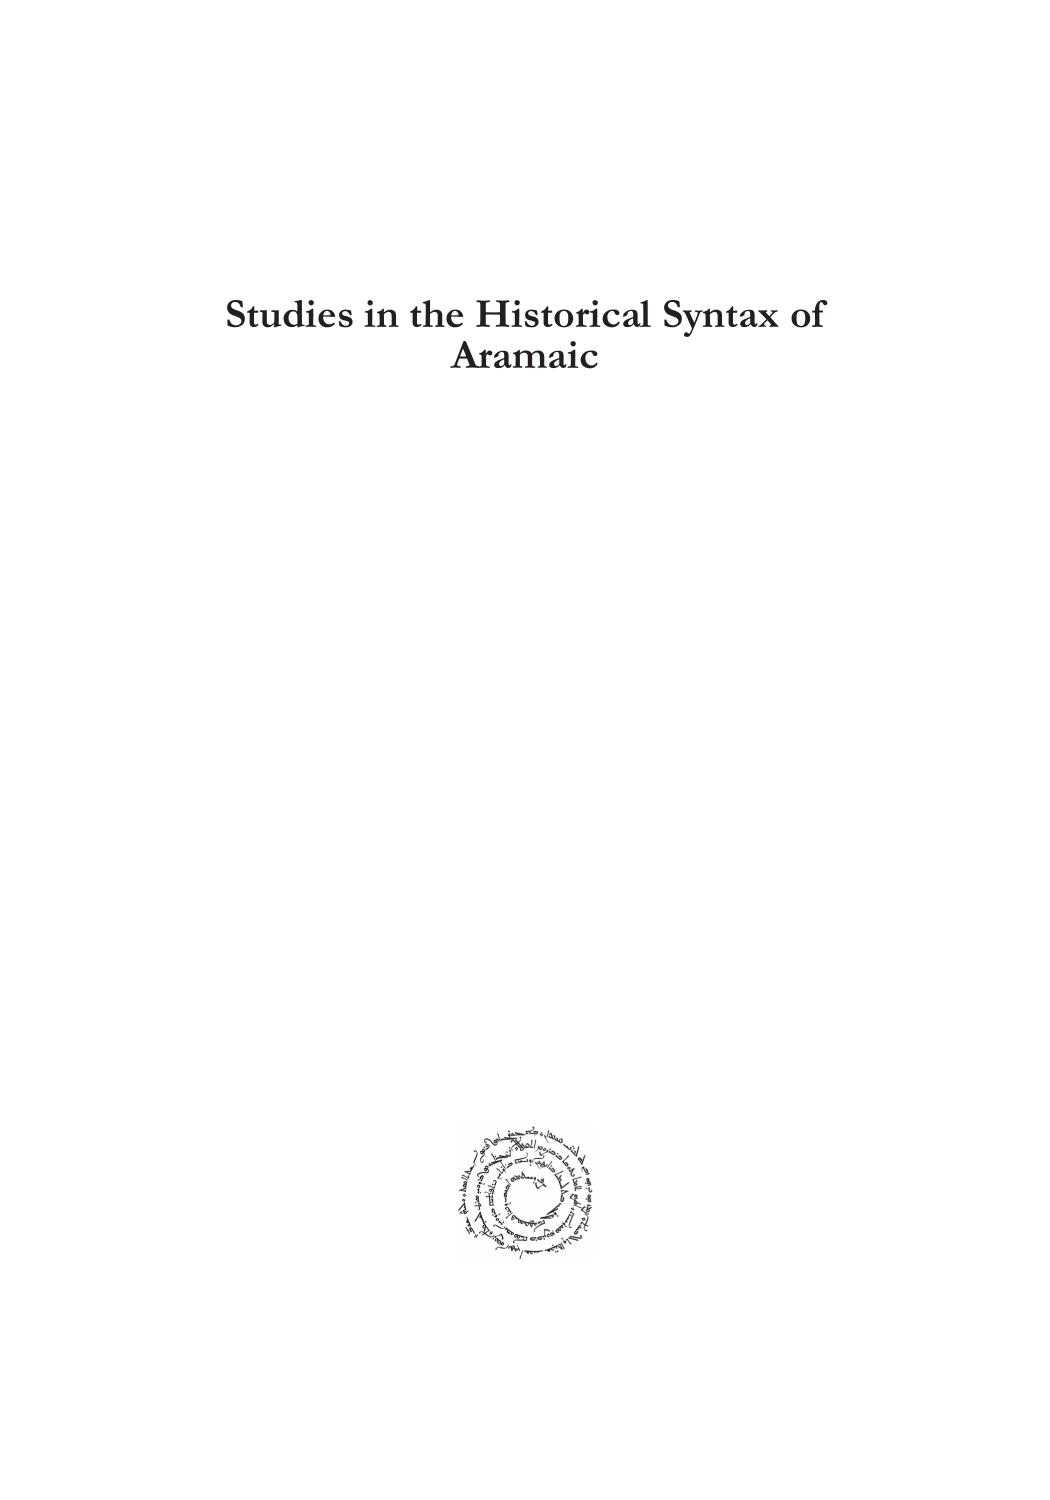 Studies in the Historical Syntax of Aramaic (Perspectives on Linguistics and Ancient Languages) by Na'ama Pat-El